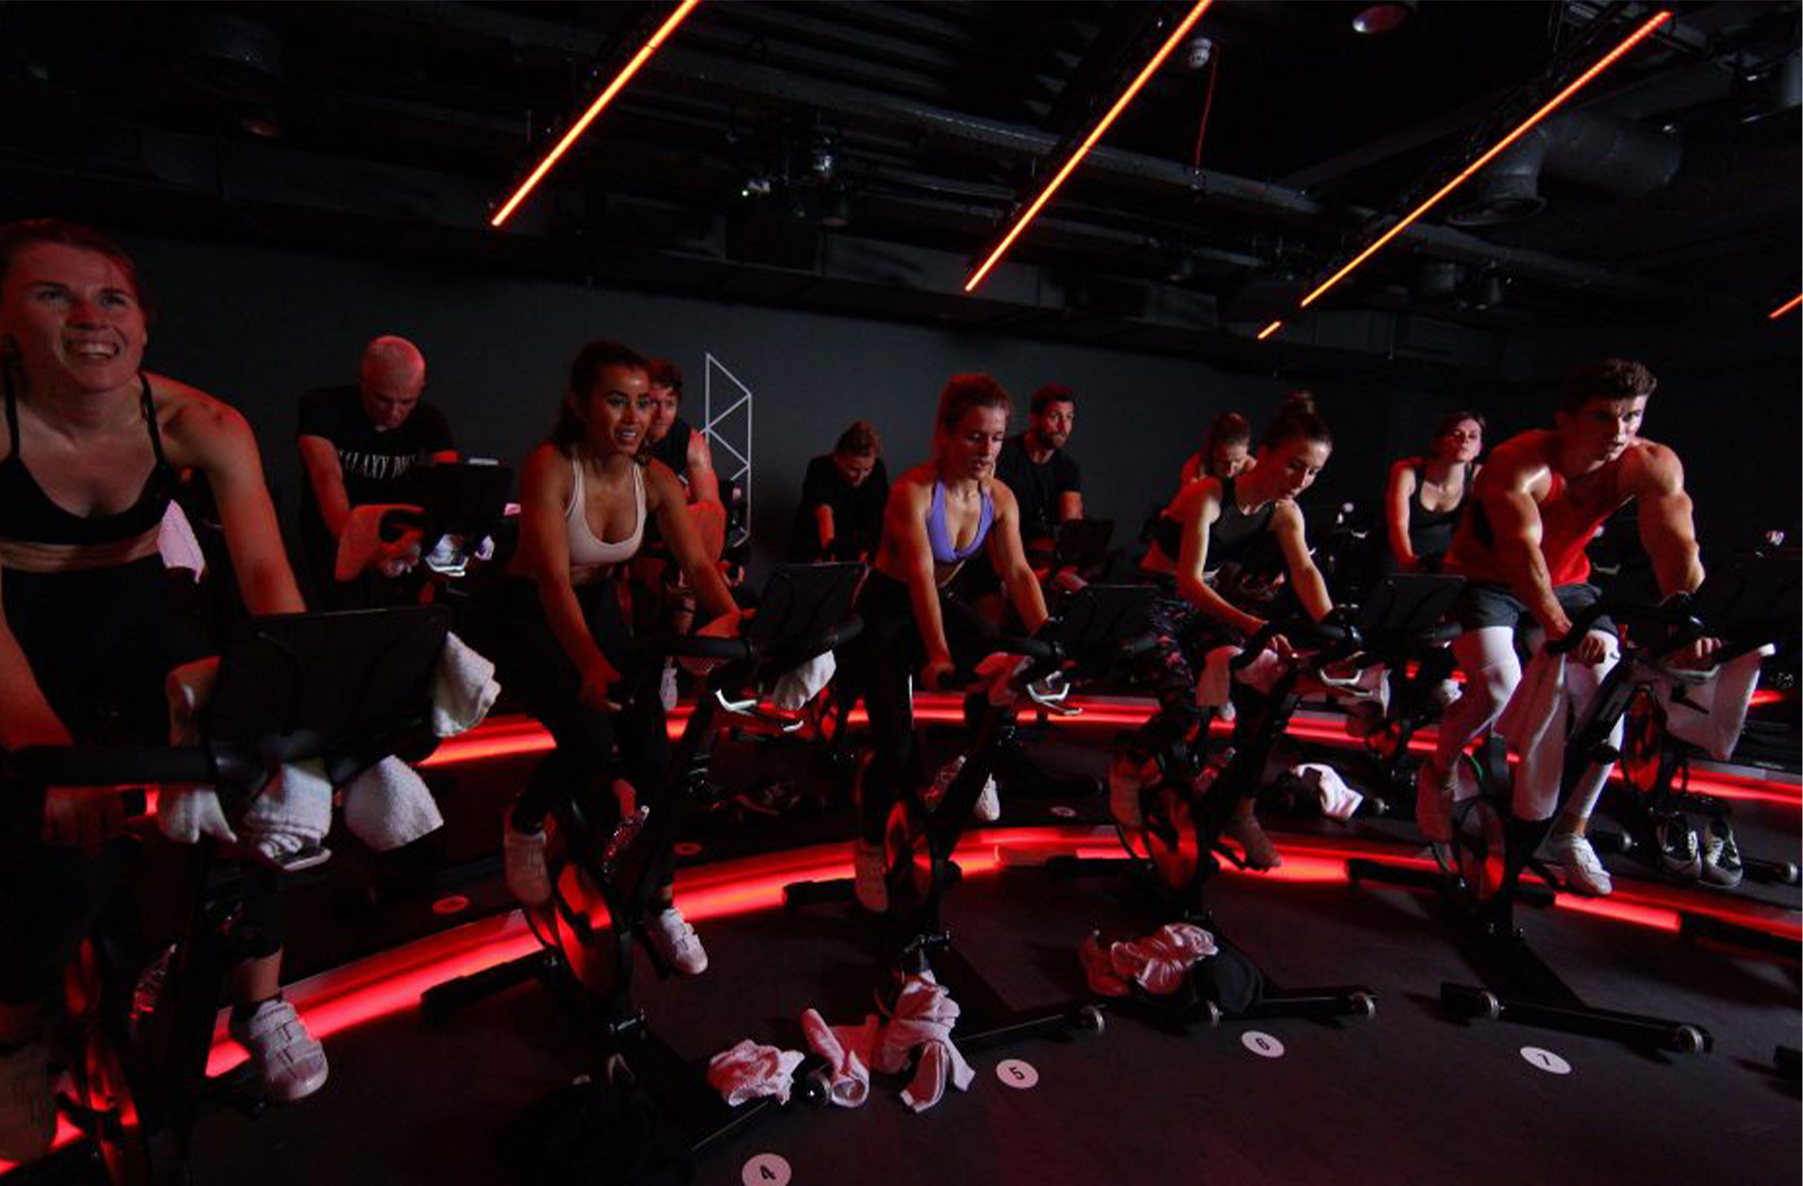 indoor stage cycling under the mood lighting